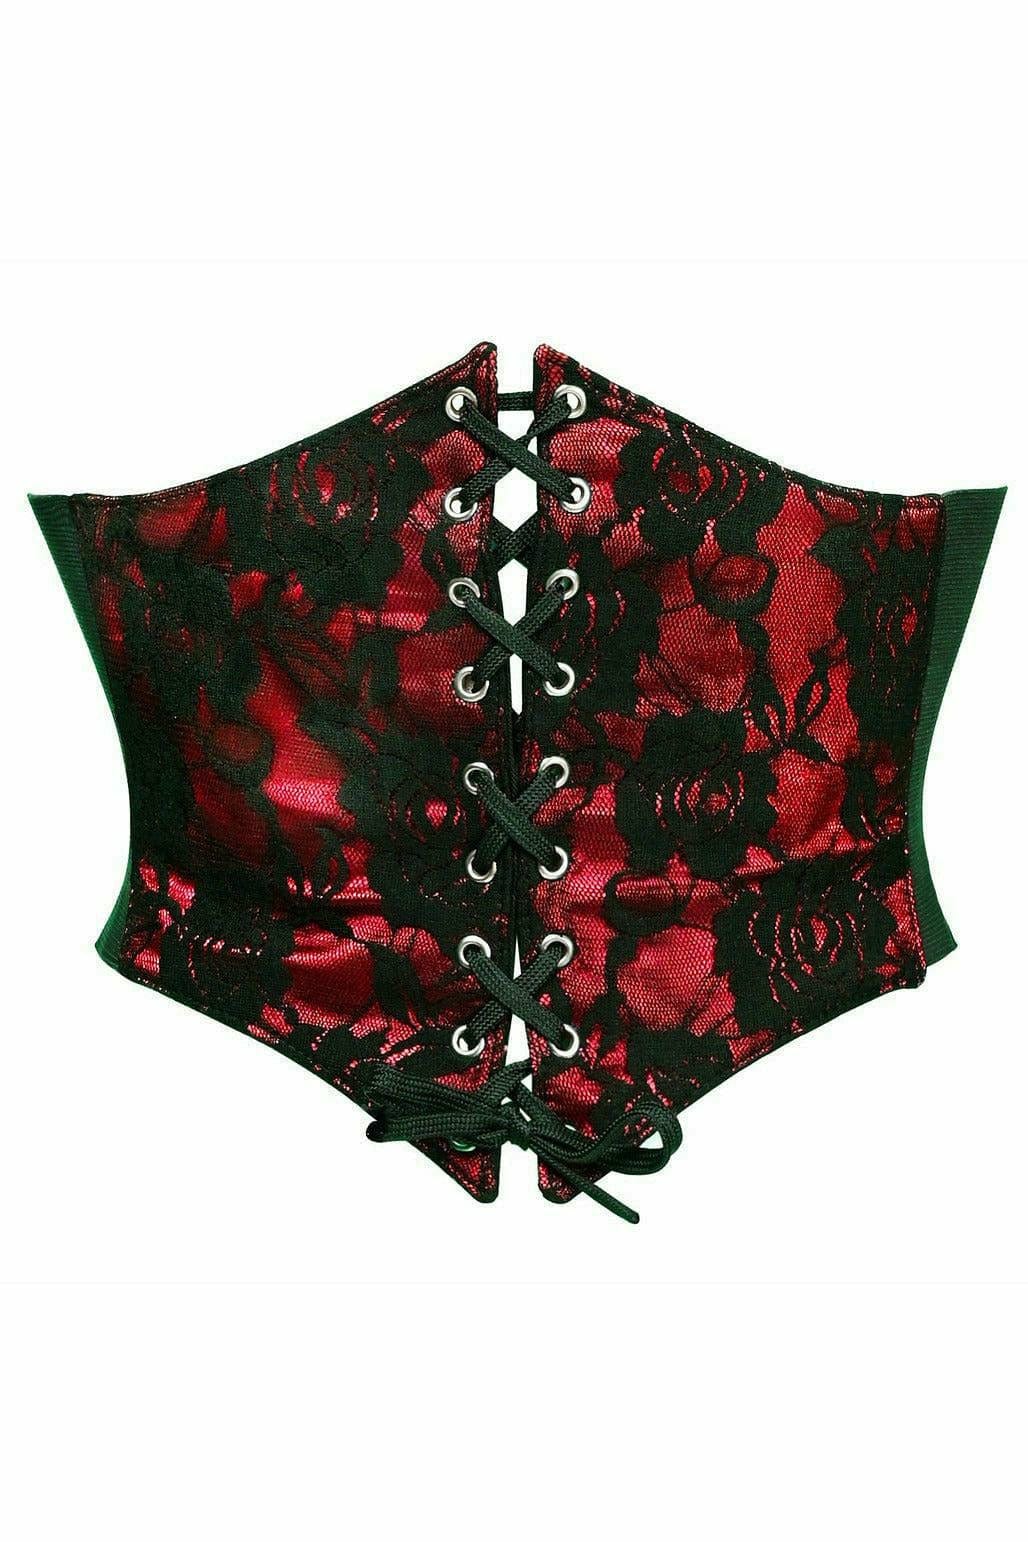 Sexy Red with Black Lace Overlay Corset Belt Cincher Musotica.com